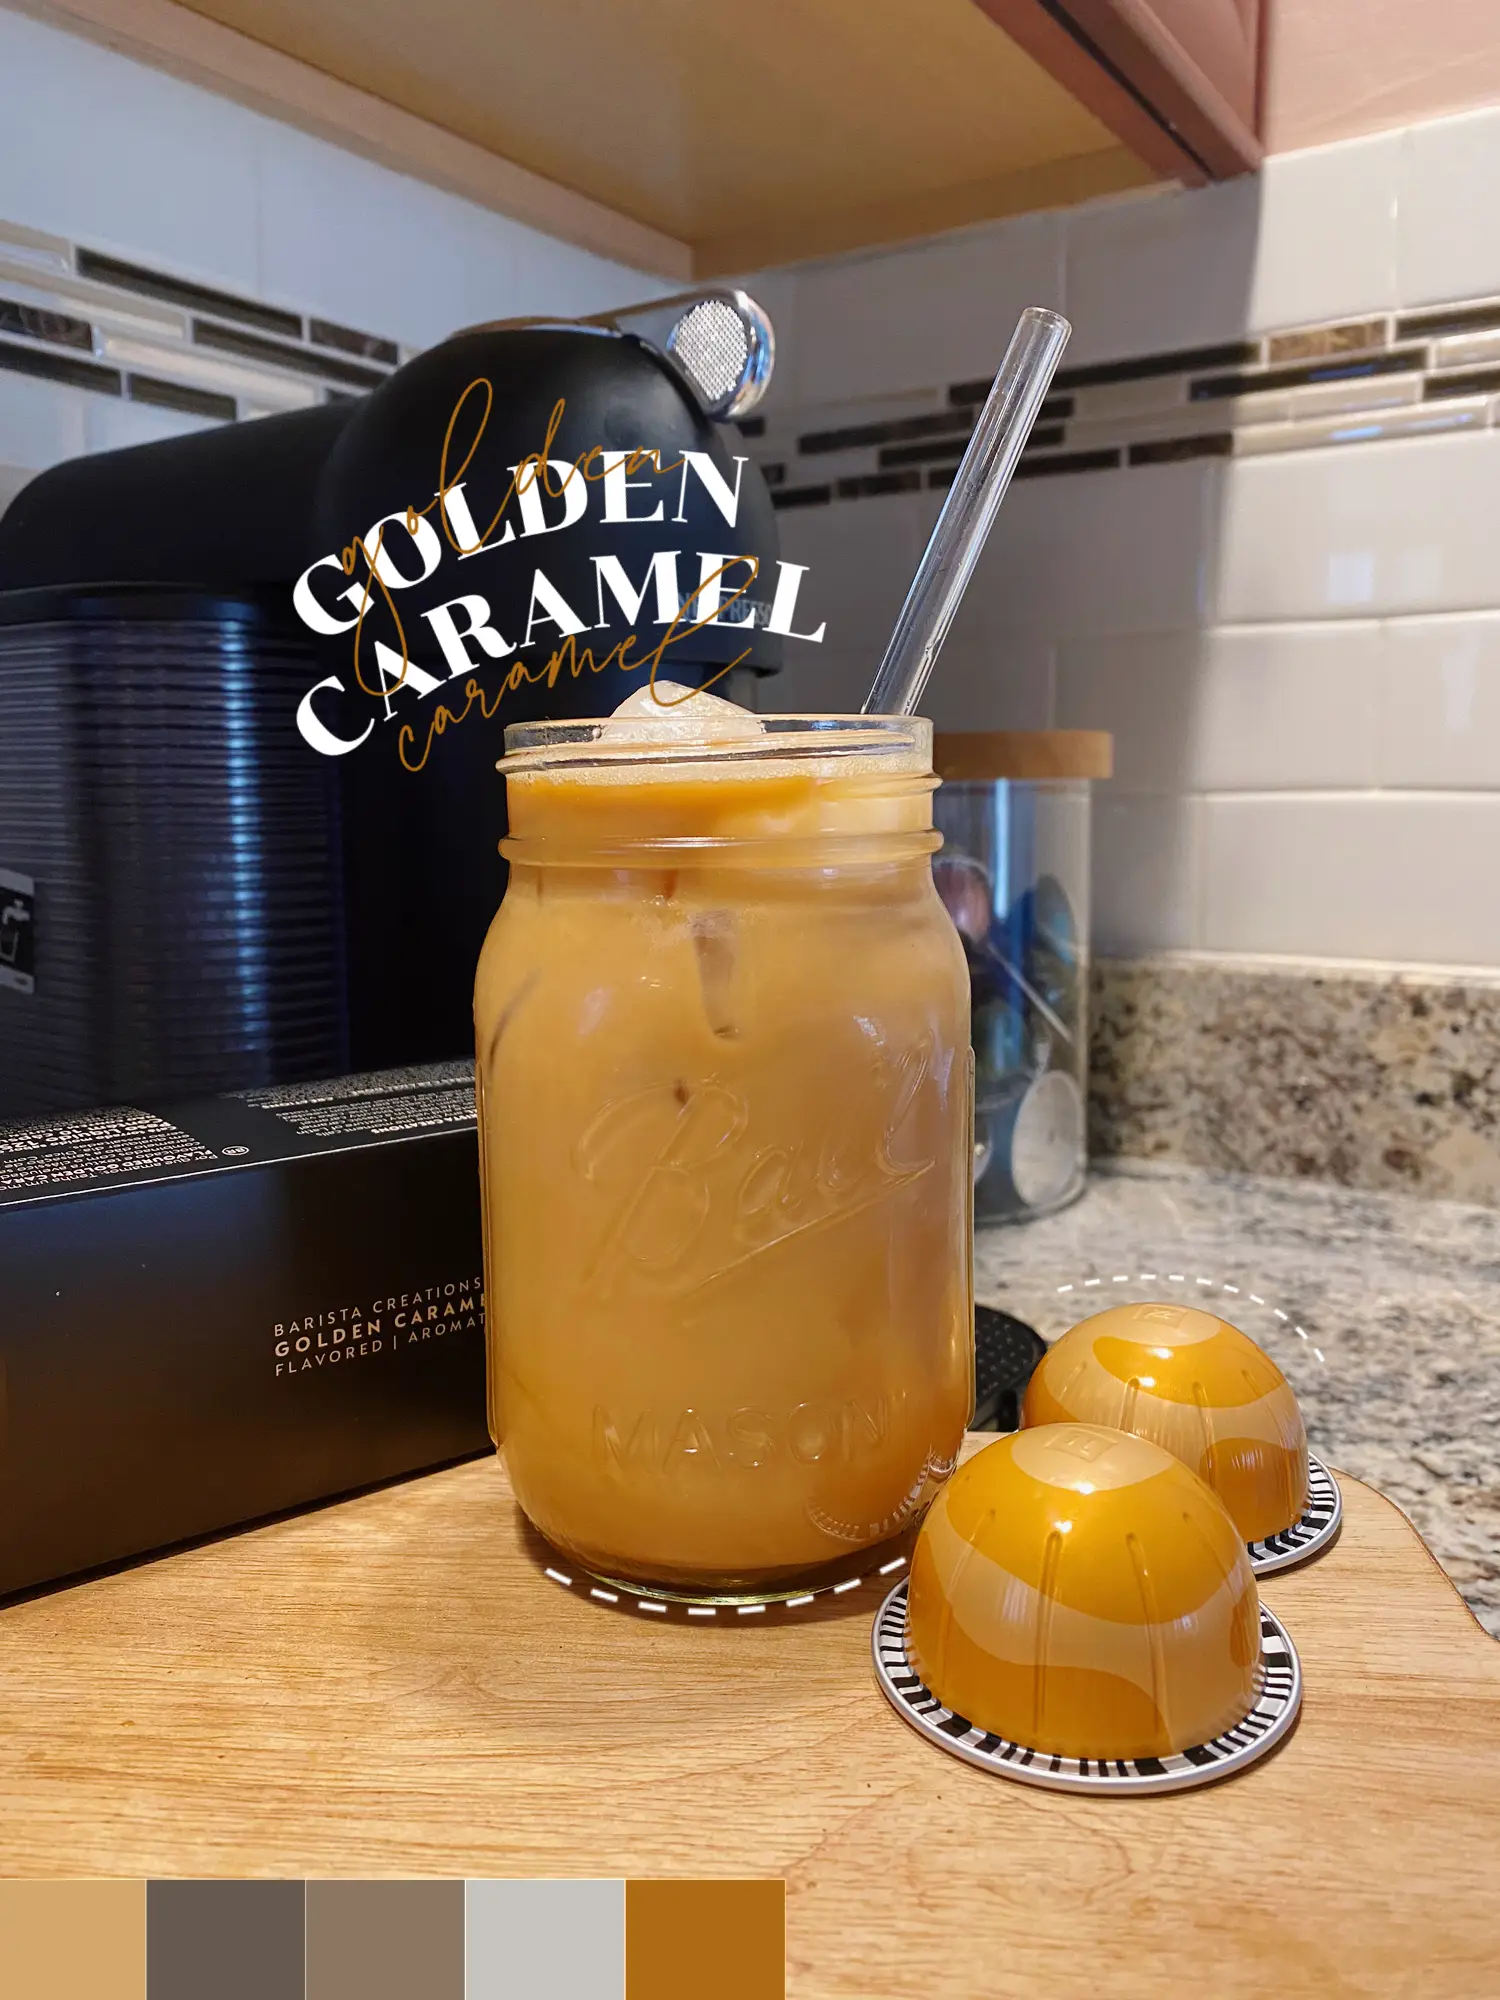 My favorite way to have the Golden Caramel pod 🤤 #icedcoffee